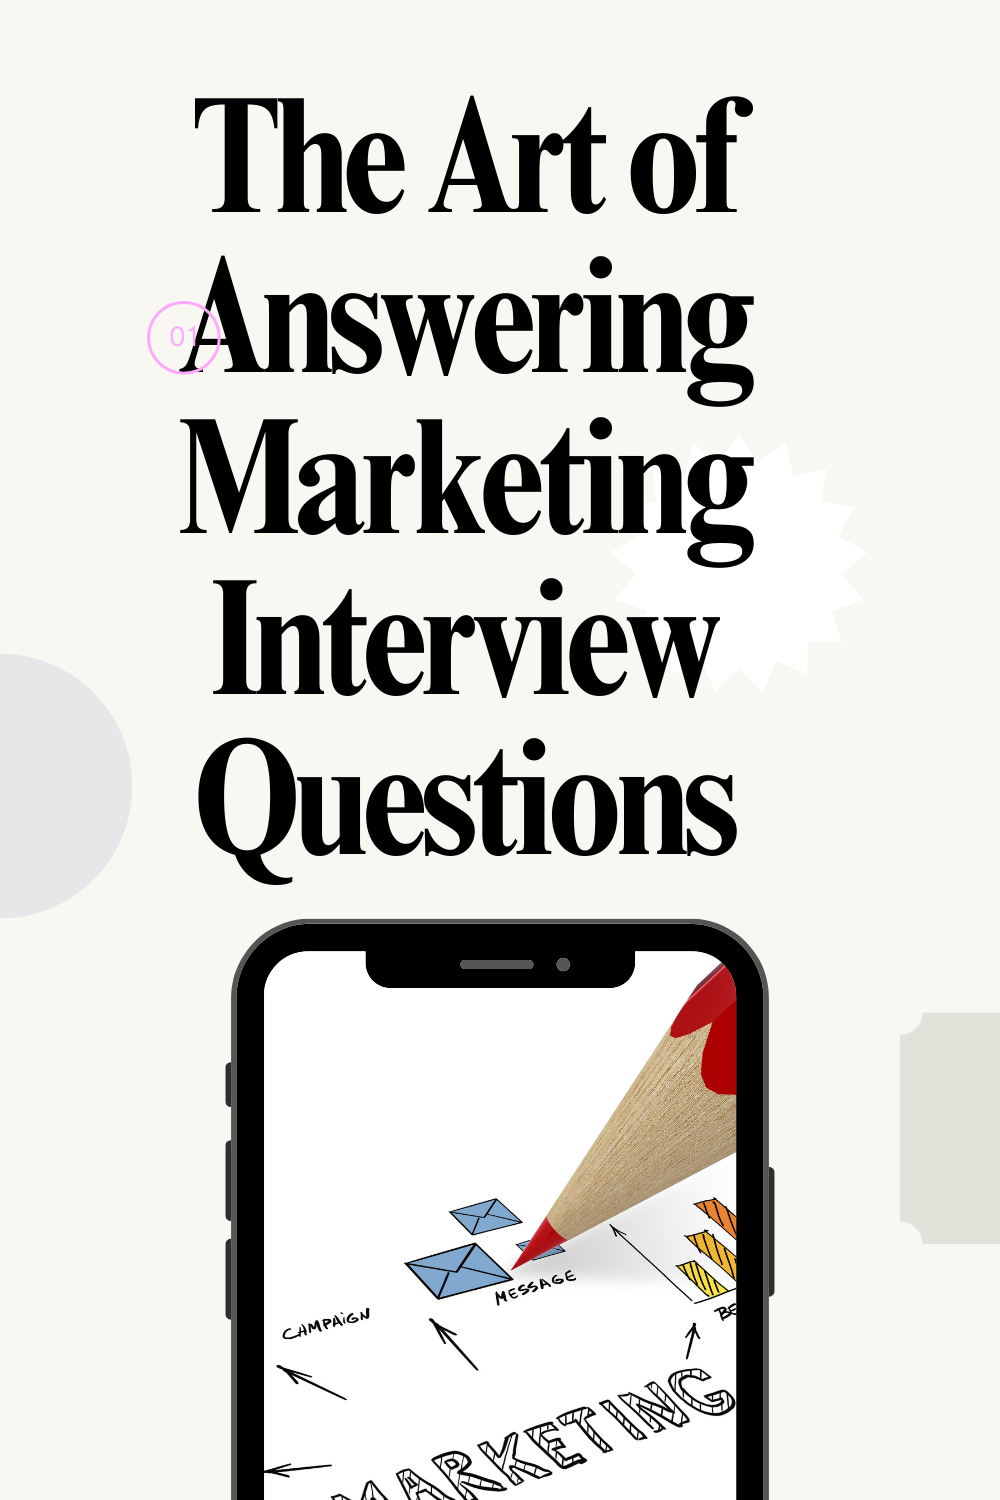 The Art of Answering Marketing Interview Questions